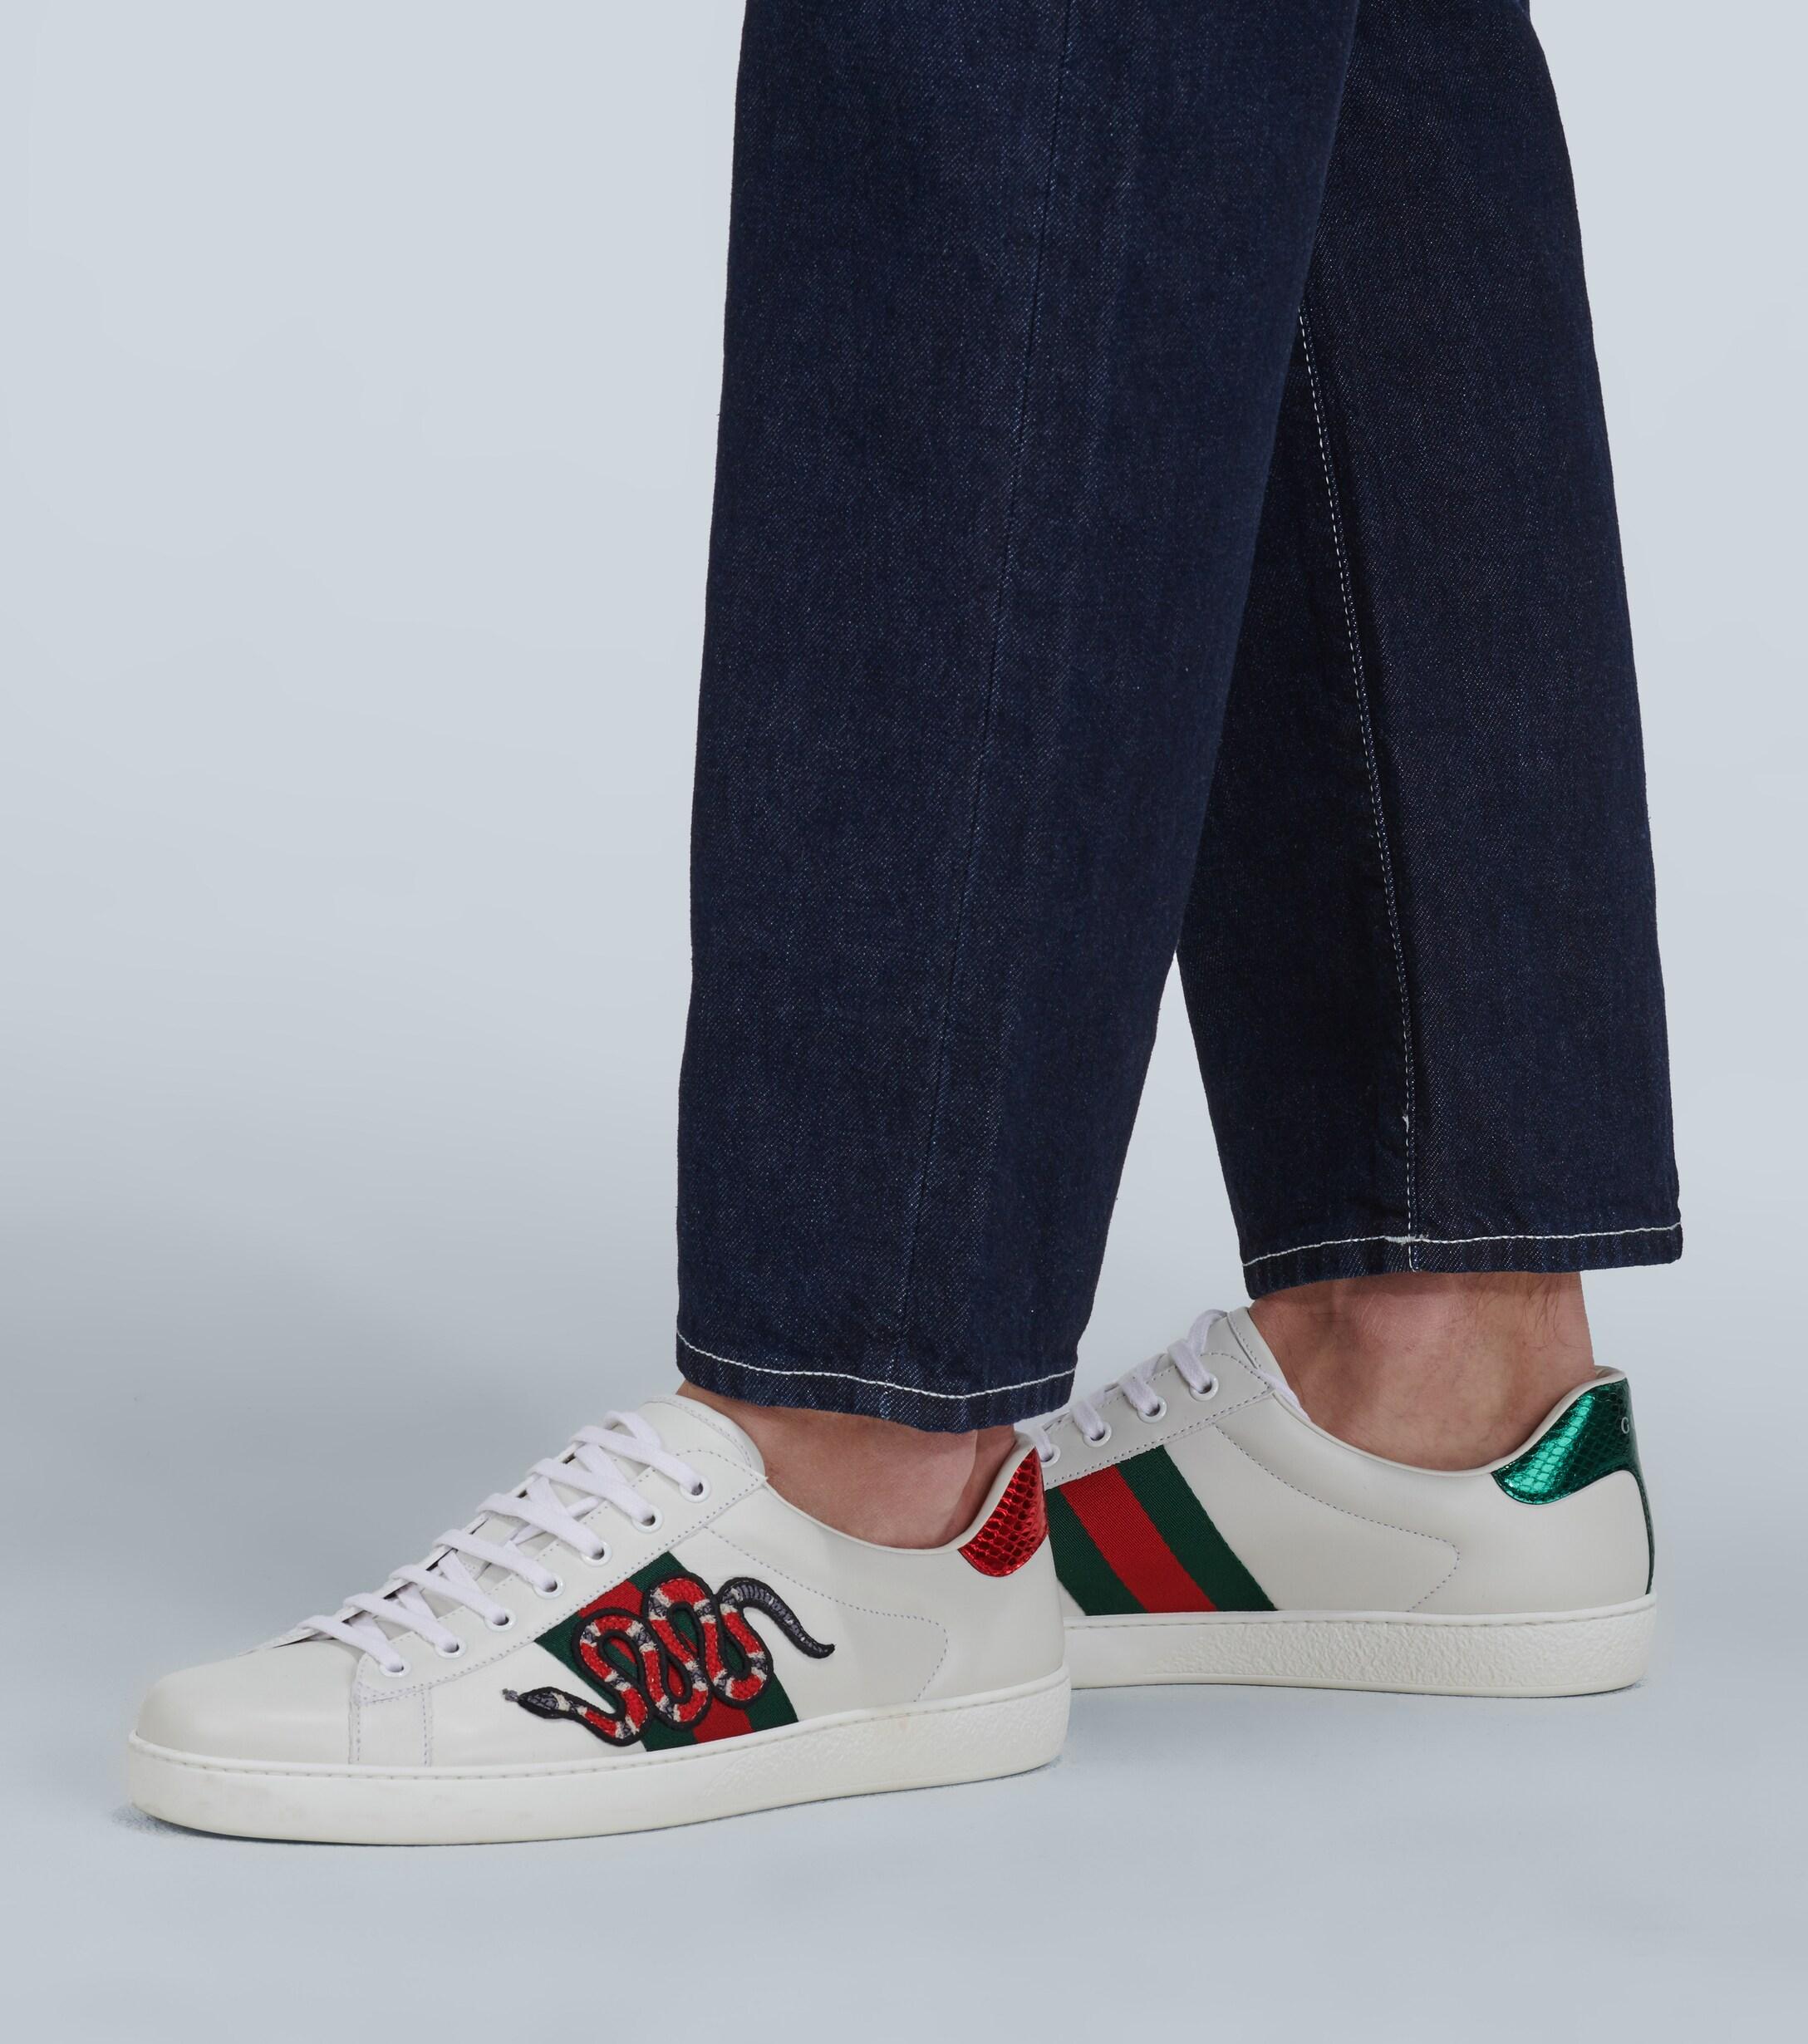 Gucci Leather Ace Embroidered Sneaker in White for - Save 45% - Lyst